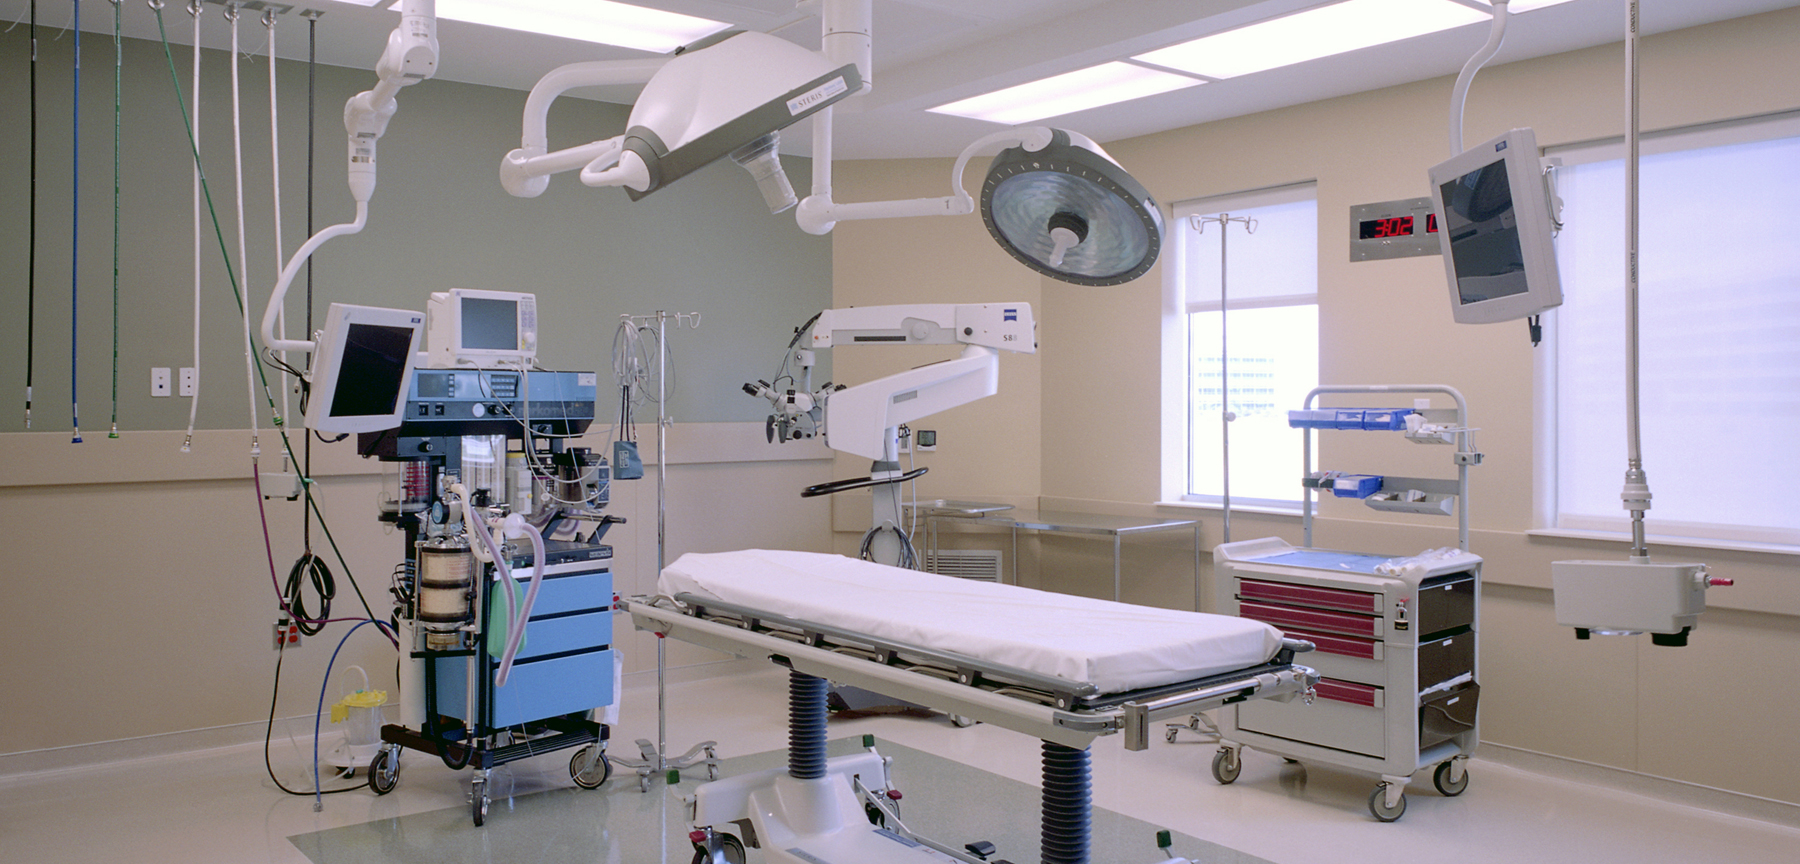 Rocky Mountain Neurosurgical Alliance/Denver Neospine operating room